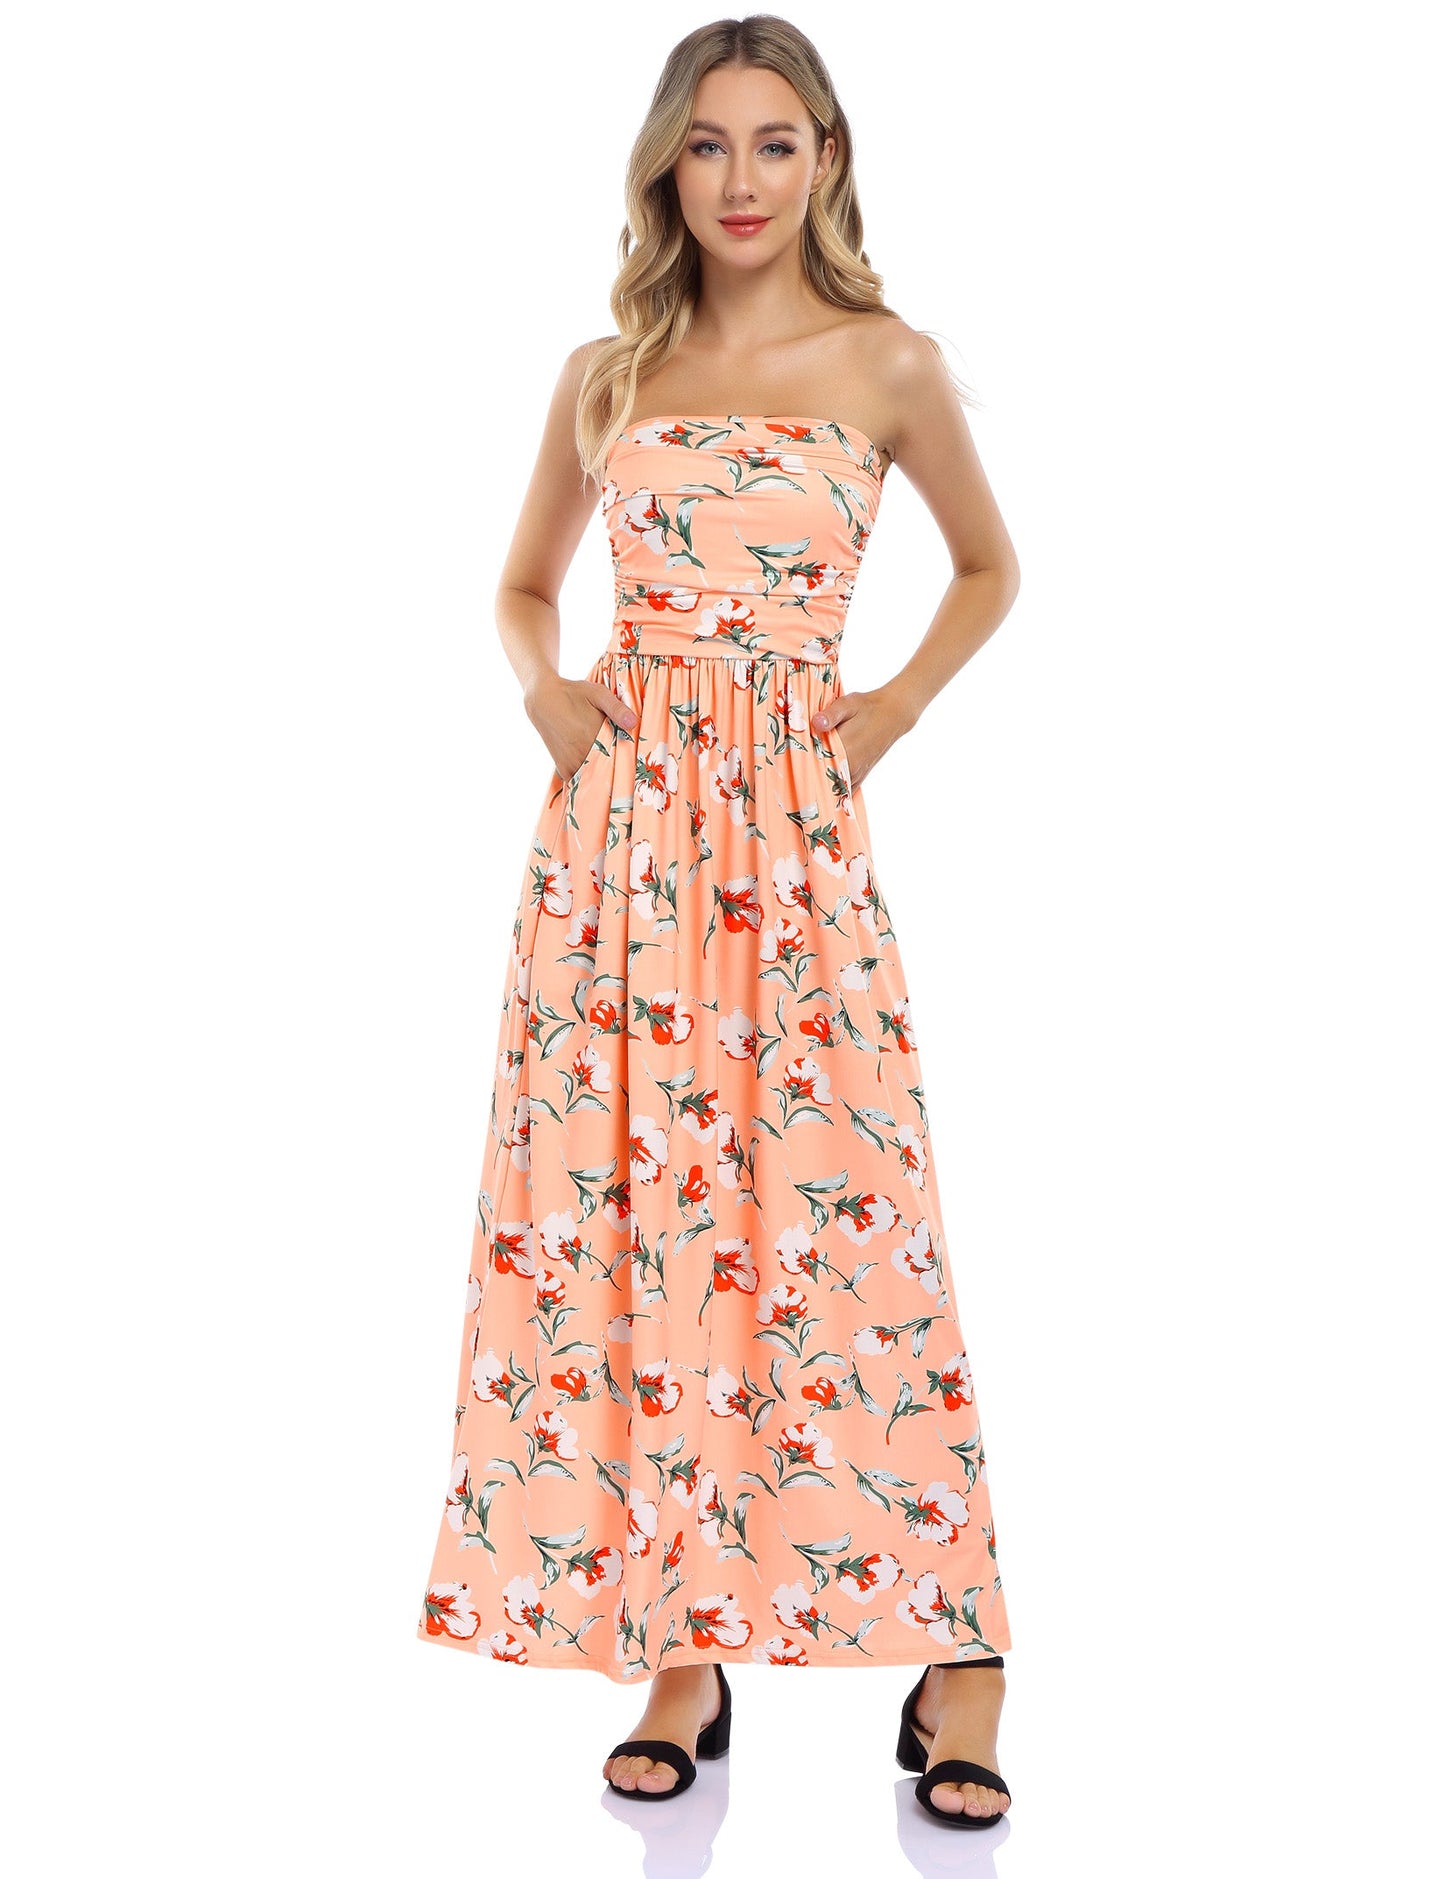 YESFASHION Women's Strapless Graceful Floral Party Maxi Long Dress Navy Blue